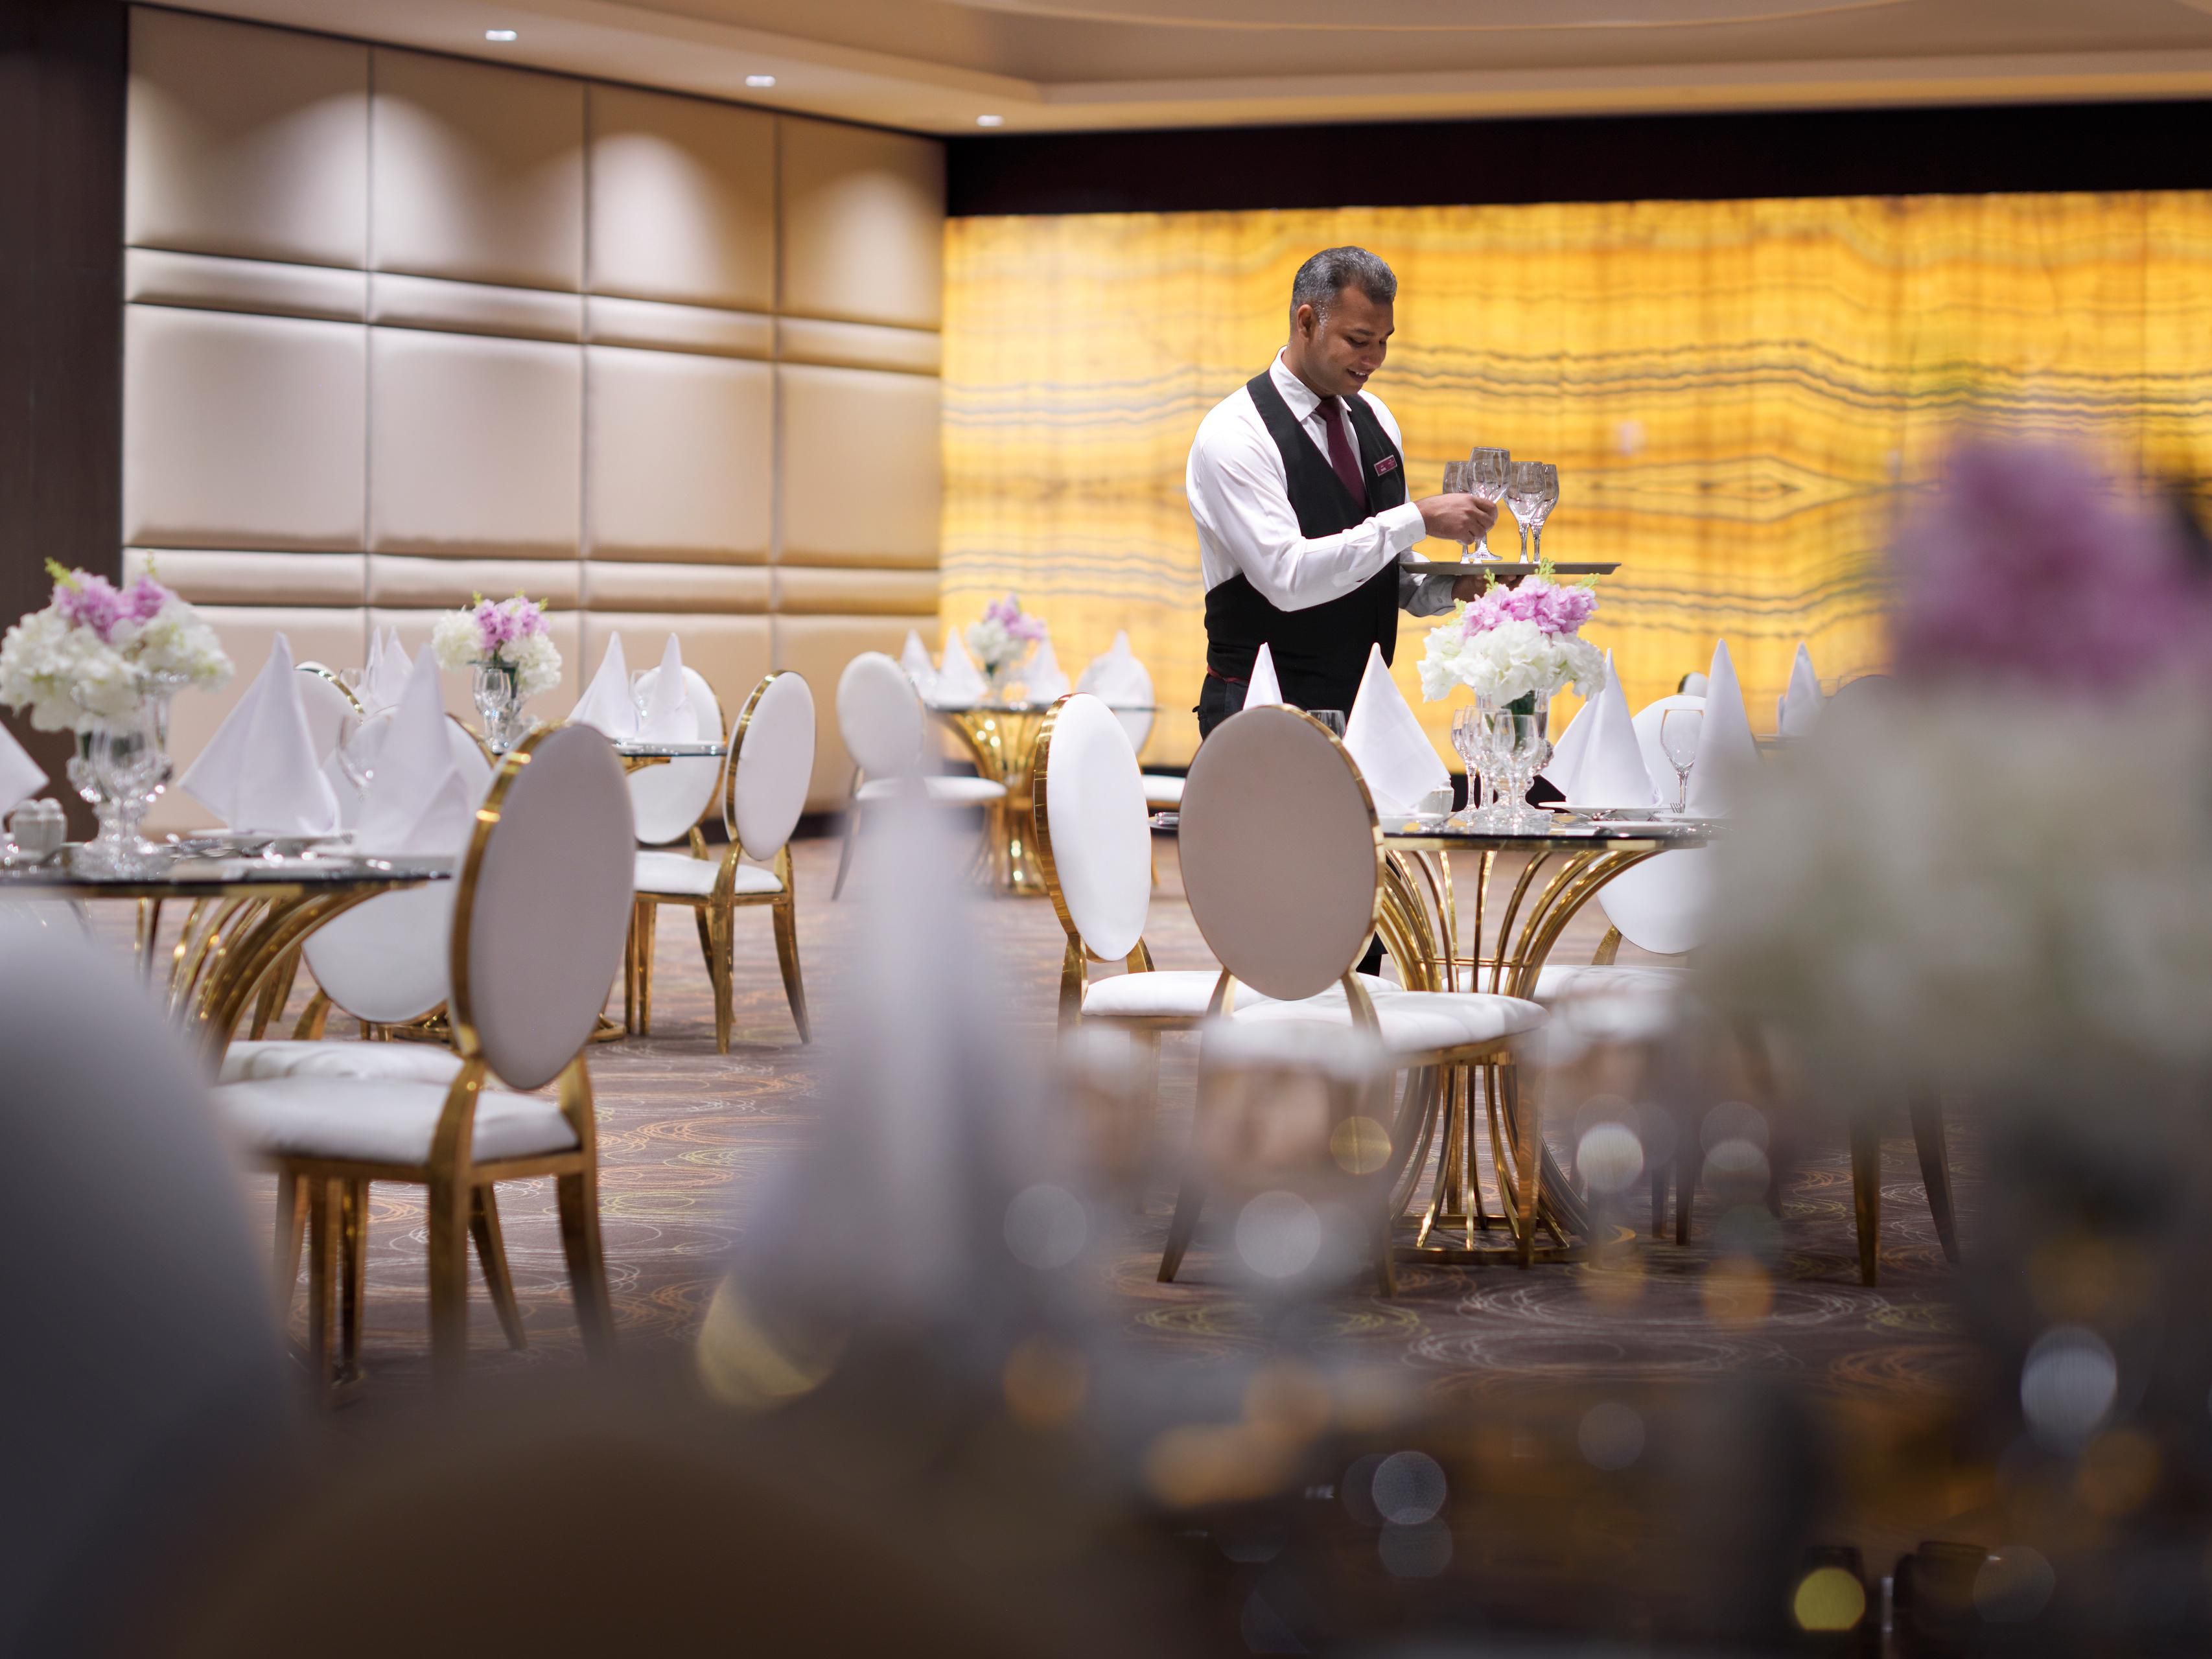 Leave the details to us as you focus on your business priorities. Our property, among the premier business hotels in Riyadh, awaits to host your meeting or company event. In accordance with our Crowne Plaza Meeting Standards, we craft a productive experience tailored to your needs, including premium equipment, diverse menus and custom arrangements.